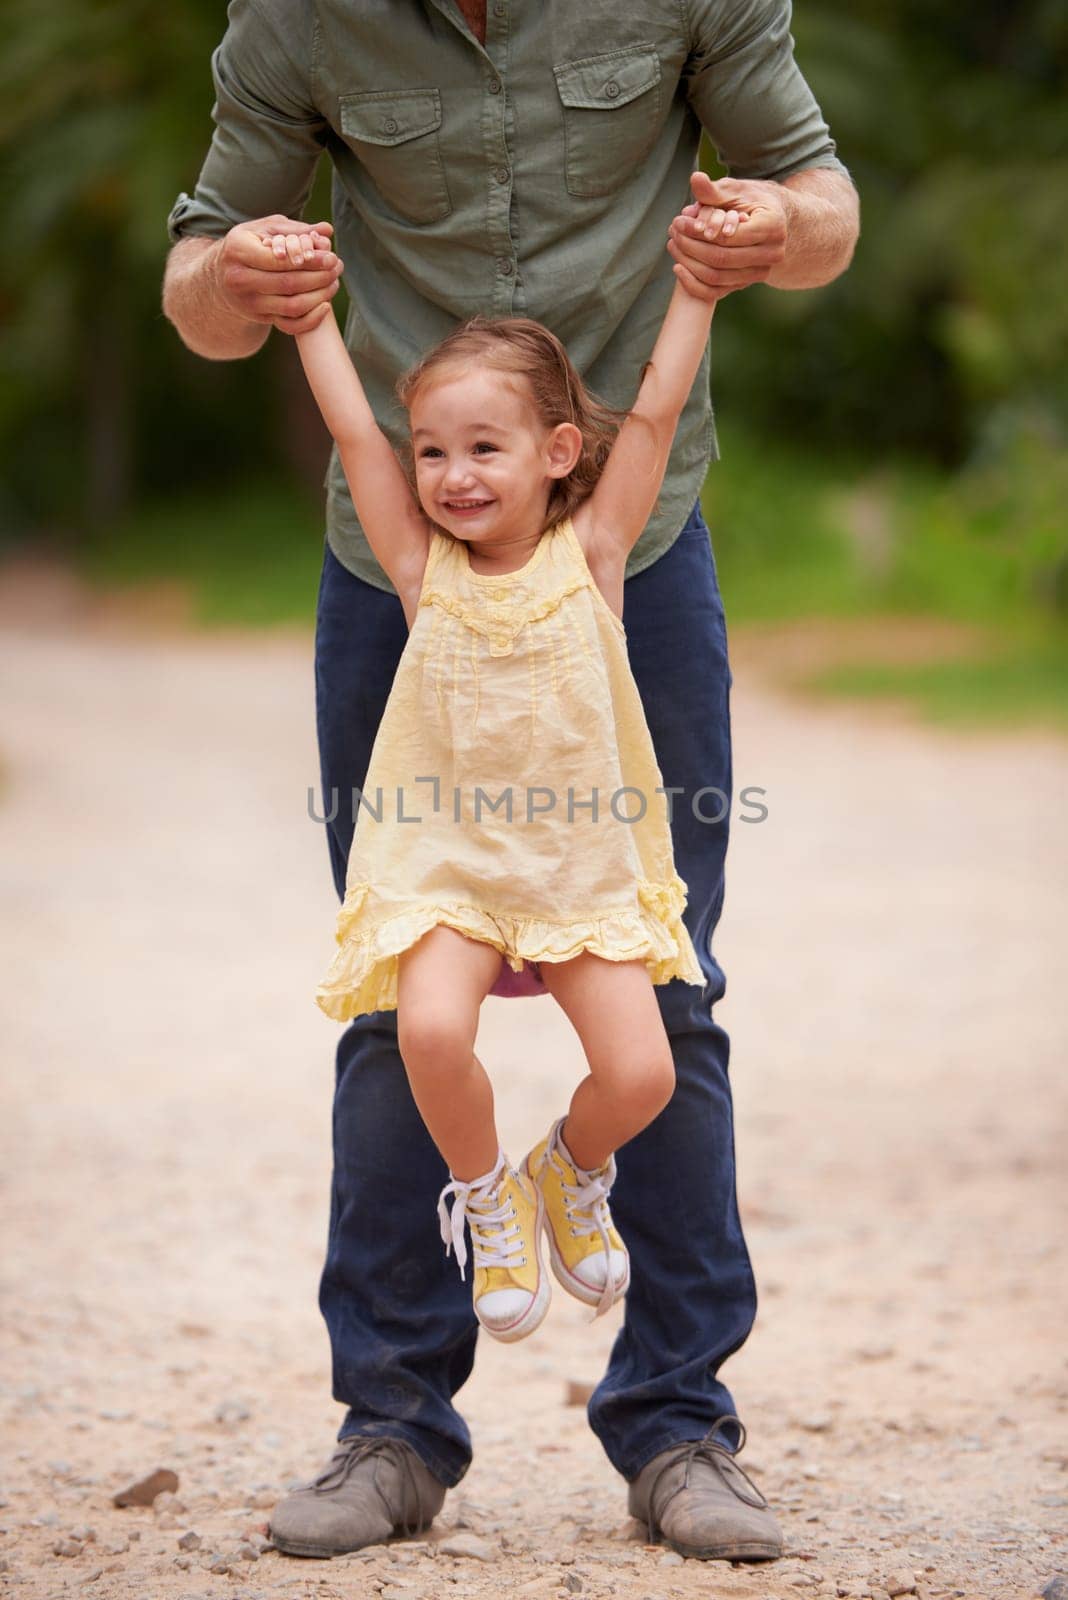 Father, child and lifting outdoor for game together in nature on holiday vacation for love connection, playing or adventure. Male person, daughter and happiness in Australia or bonding, fun or travel.